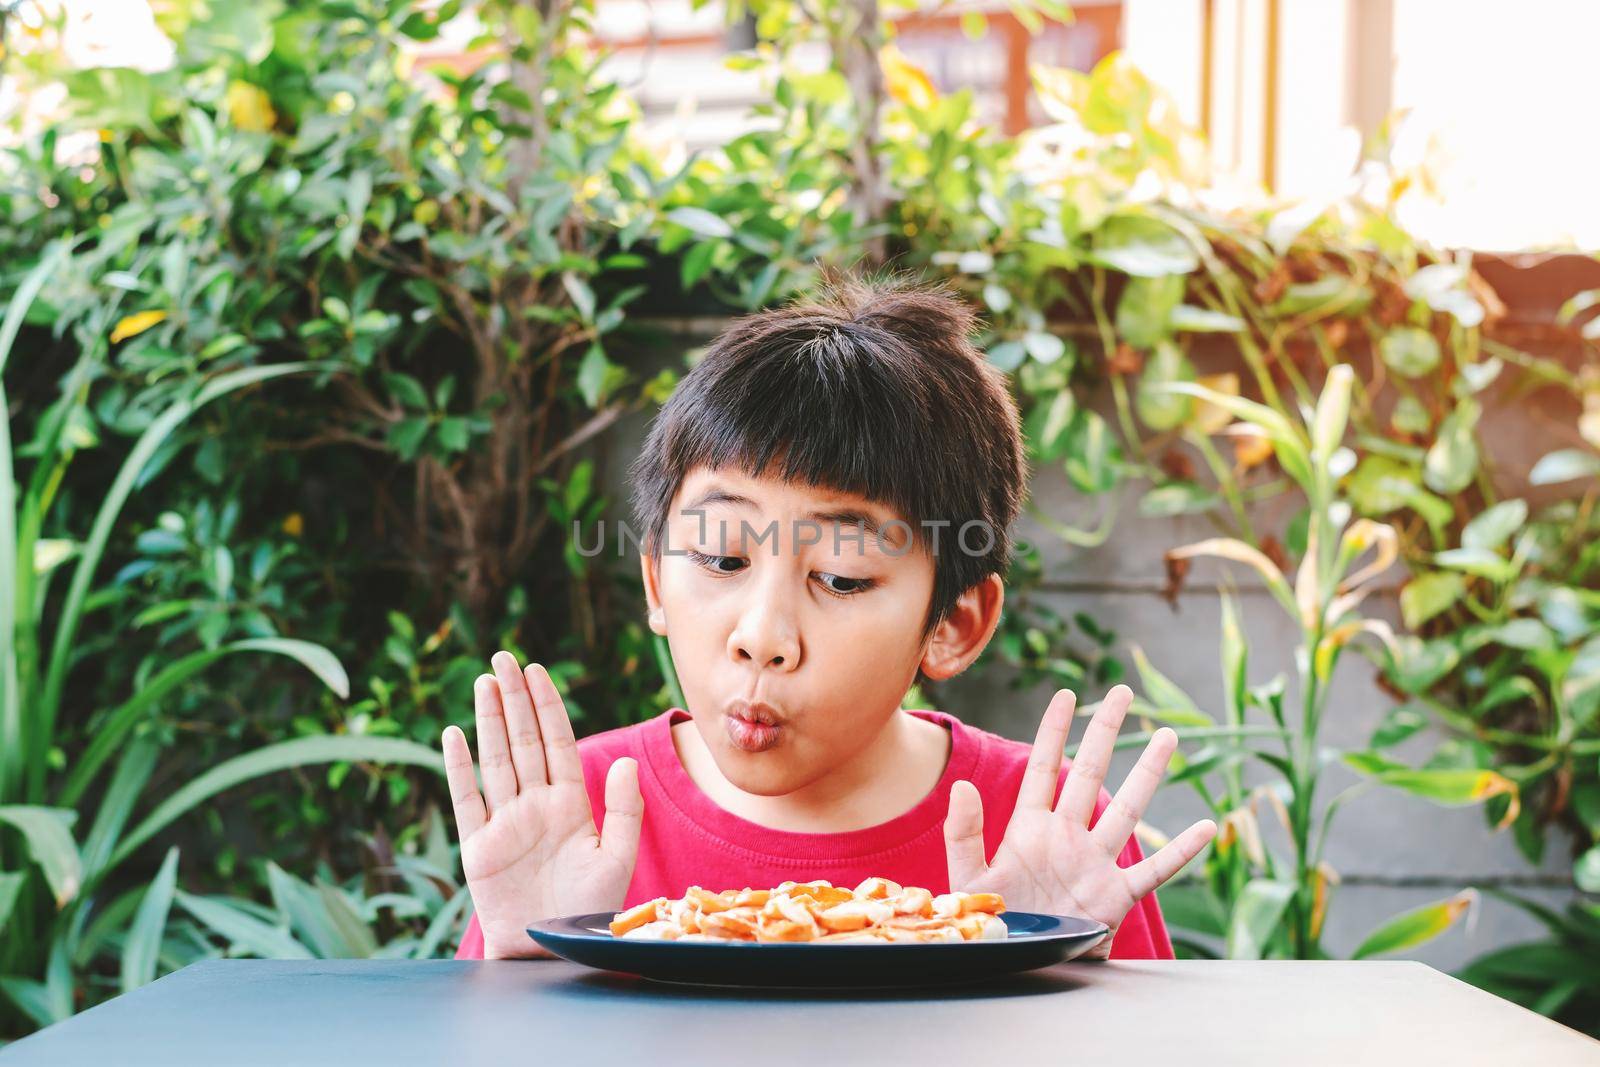 Cute Asian child in a red shirt showed a good expression when he saw a pizza in a plate placed in front of the table.